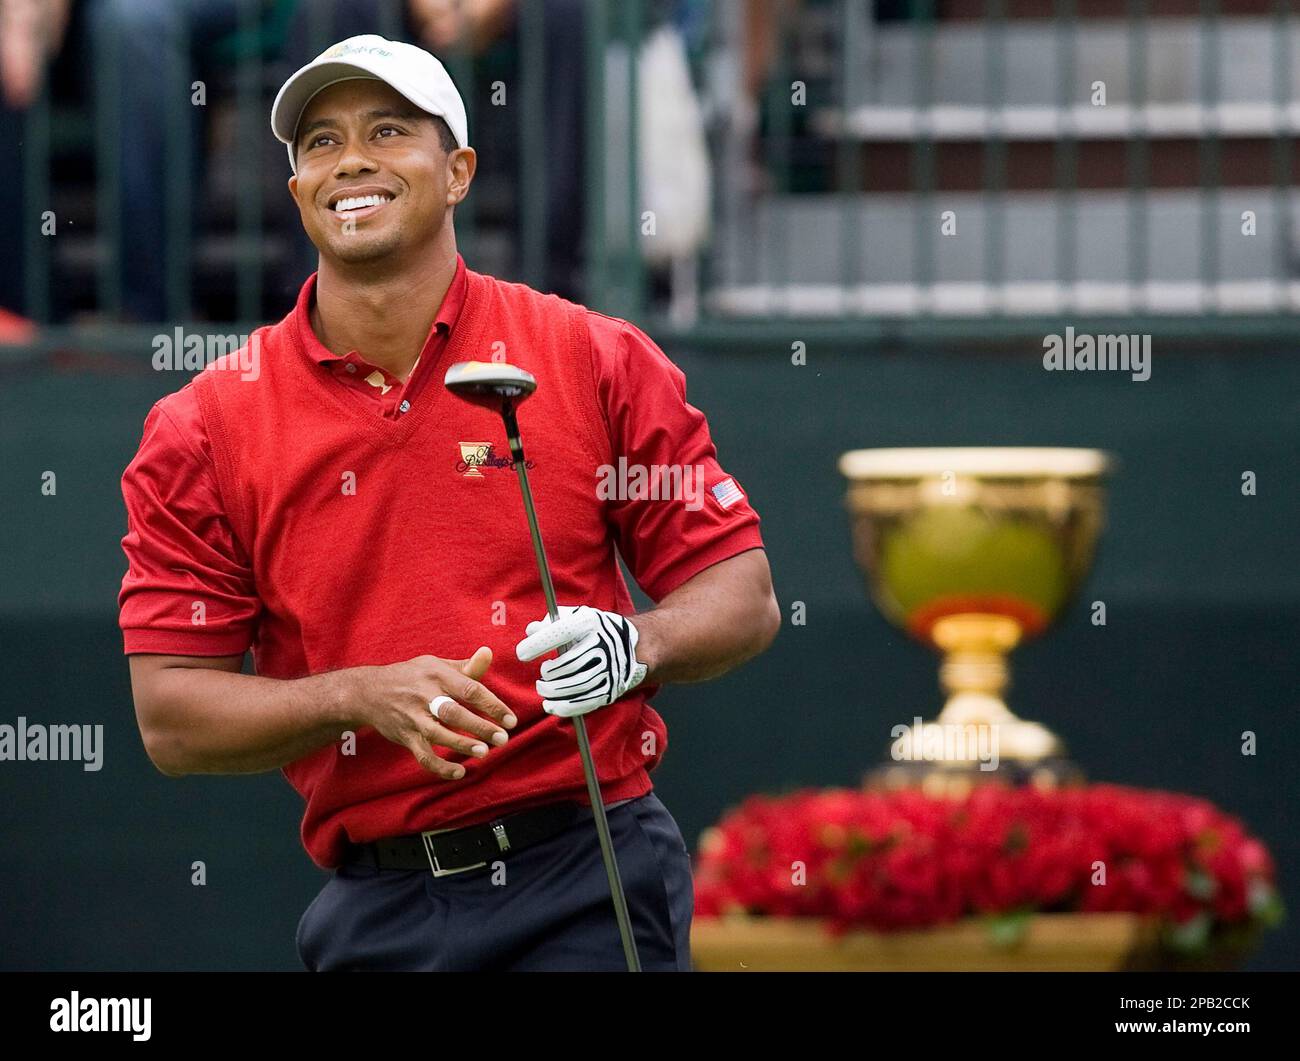 With the Presidents Cup trophy in the backround, United States team member Tiger Woods watches his drive off the first tee during first round of play at the Presidents Cup golf tournament